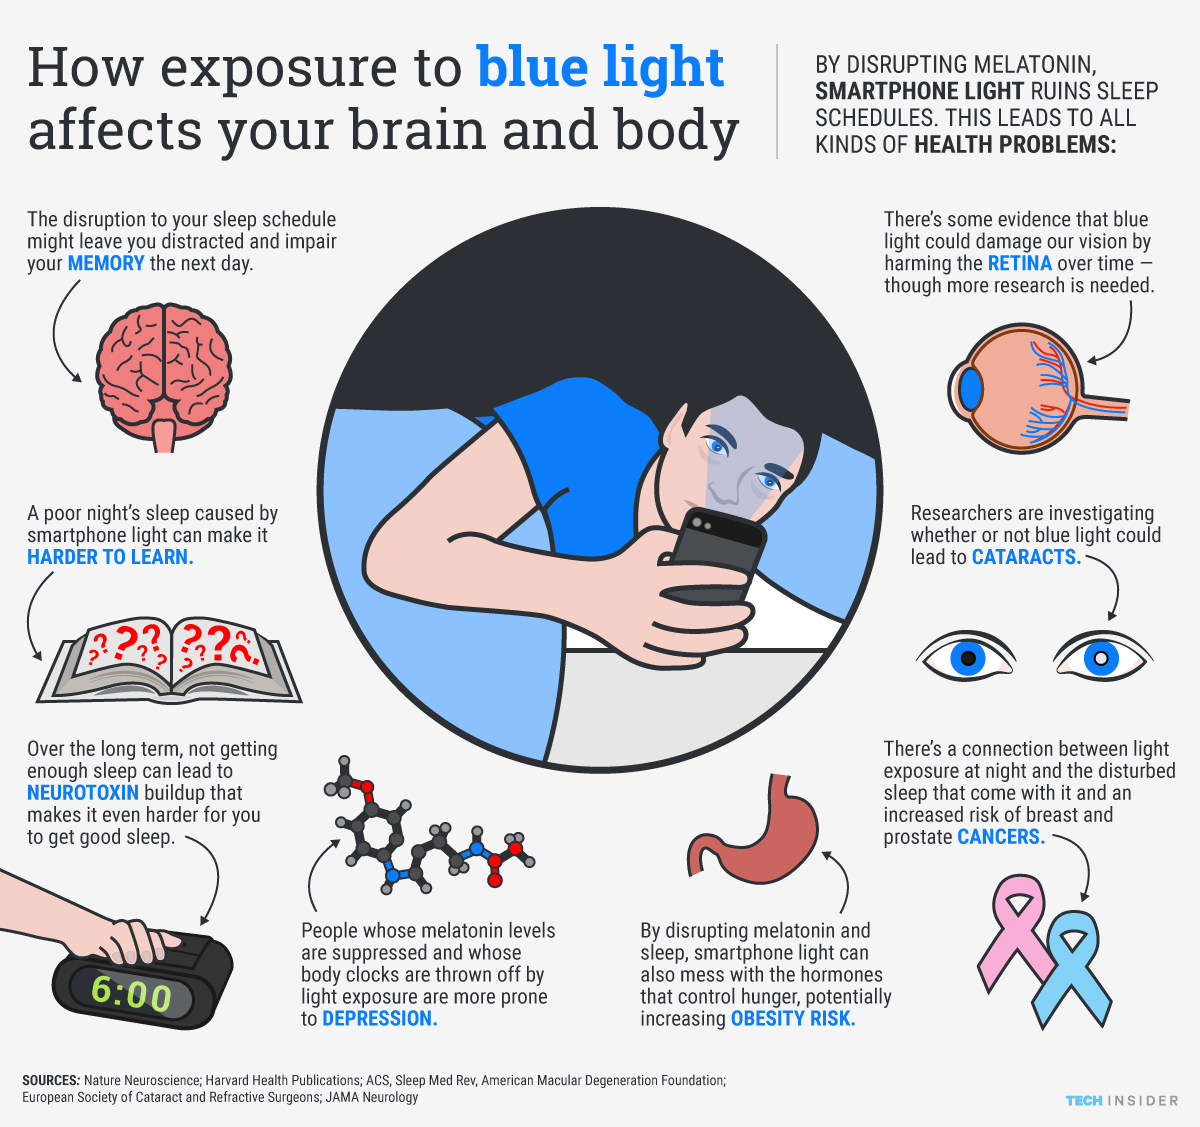 How blue light affects your brain and body.